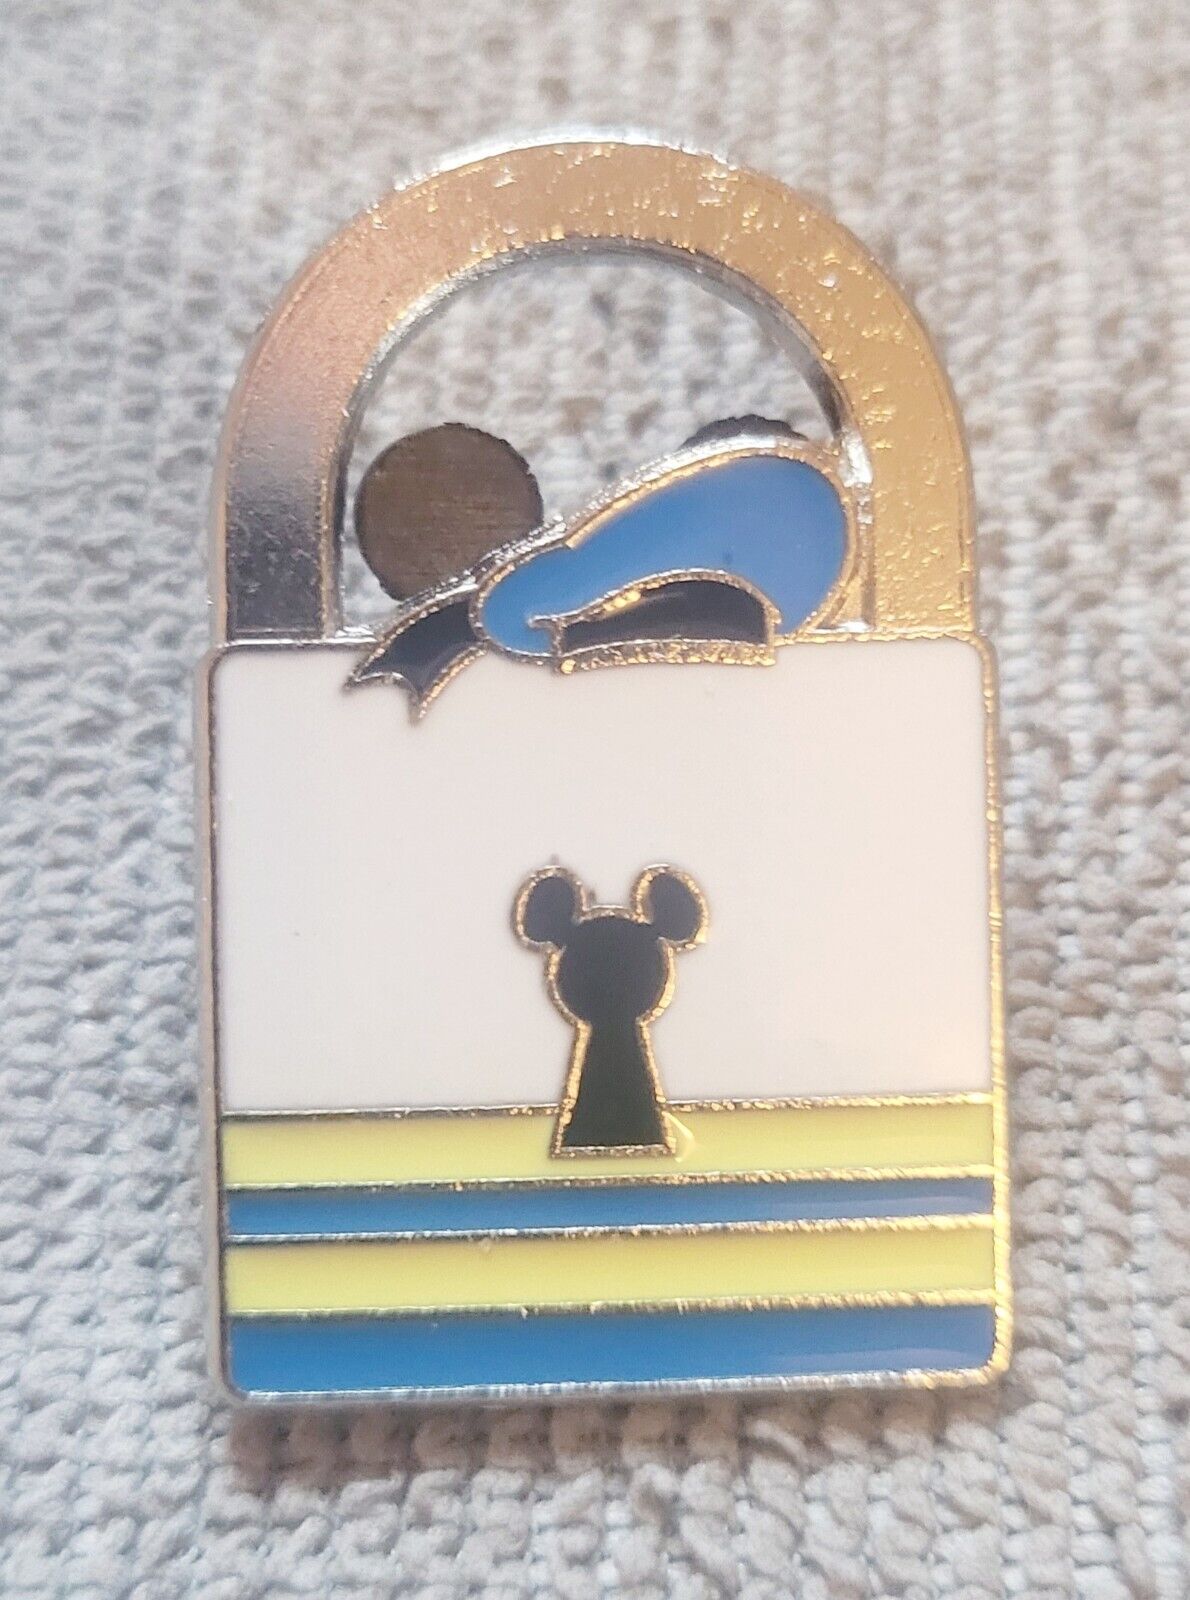 Disney Lock Donald Duck Disney Trading Pin Limited Release 